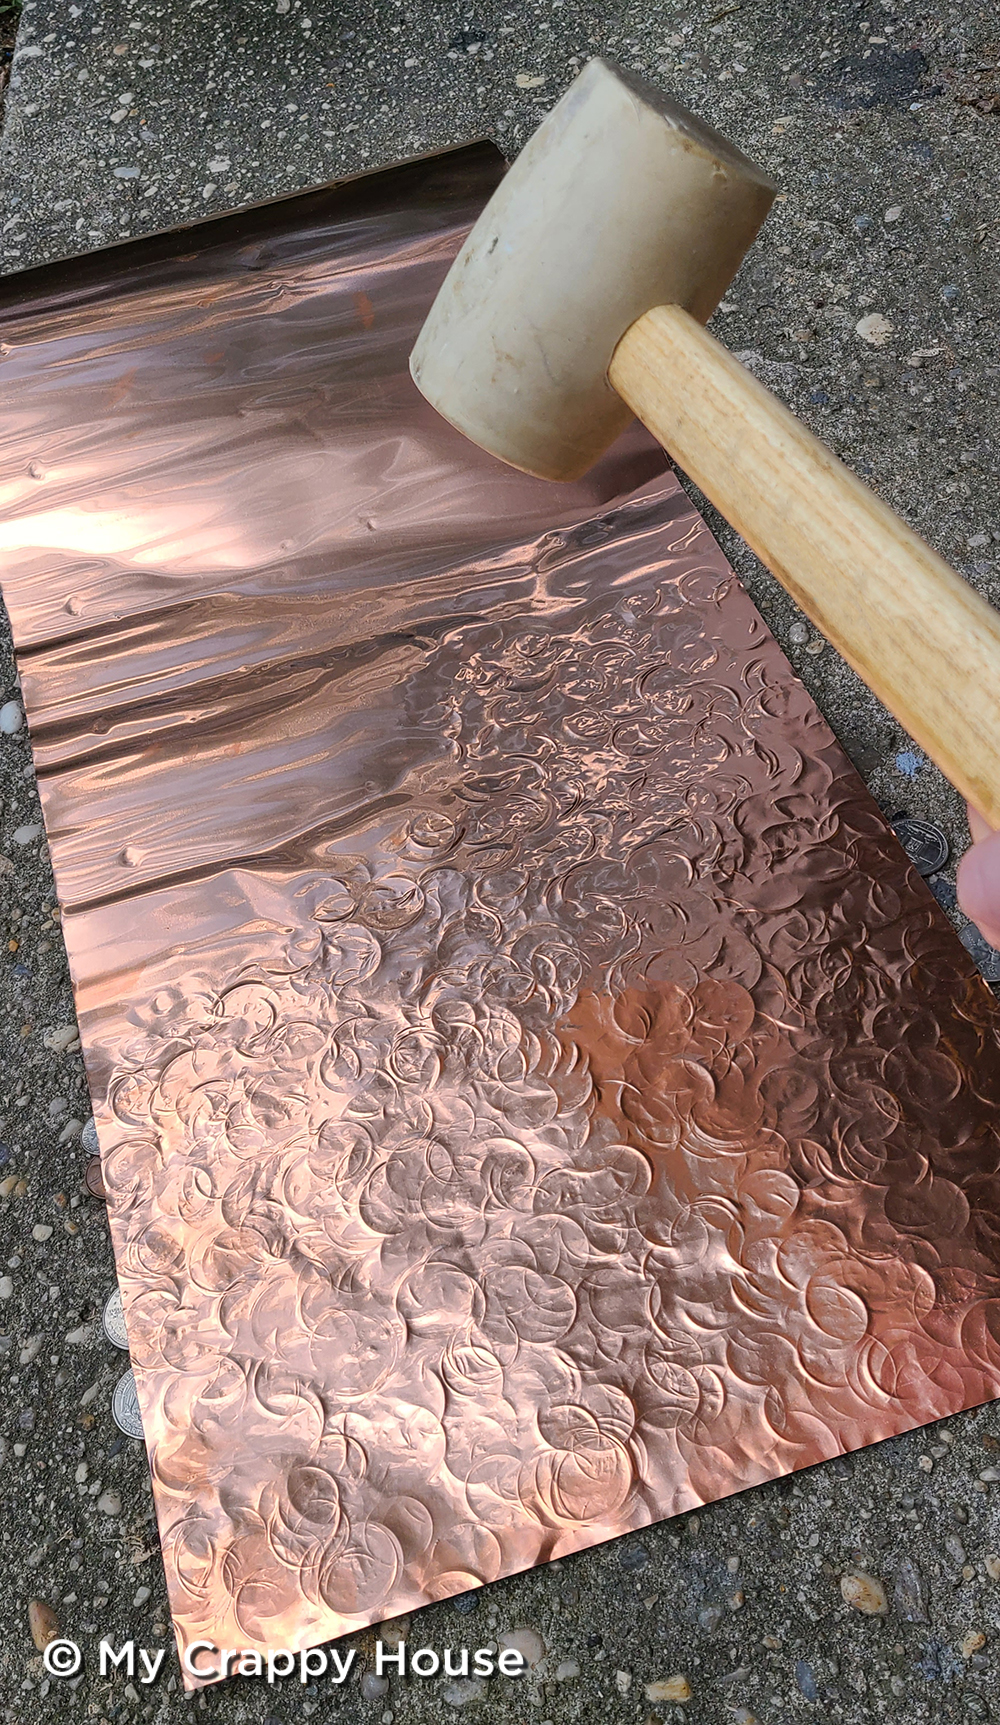 Hammering a texture into copper with a rubber mallet